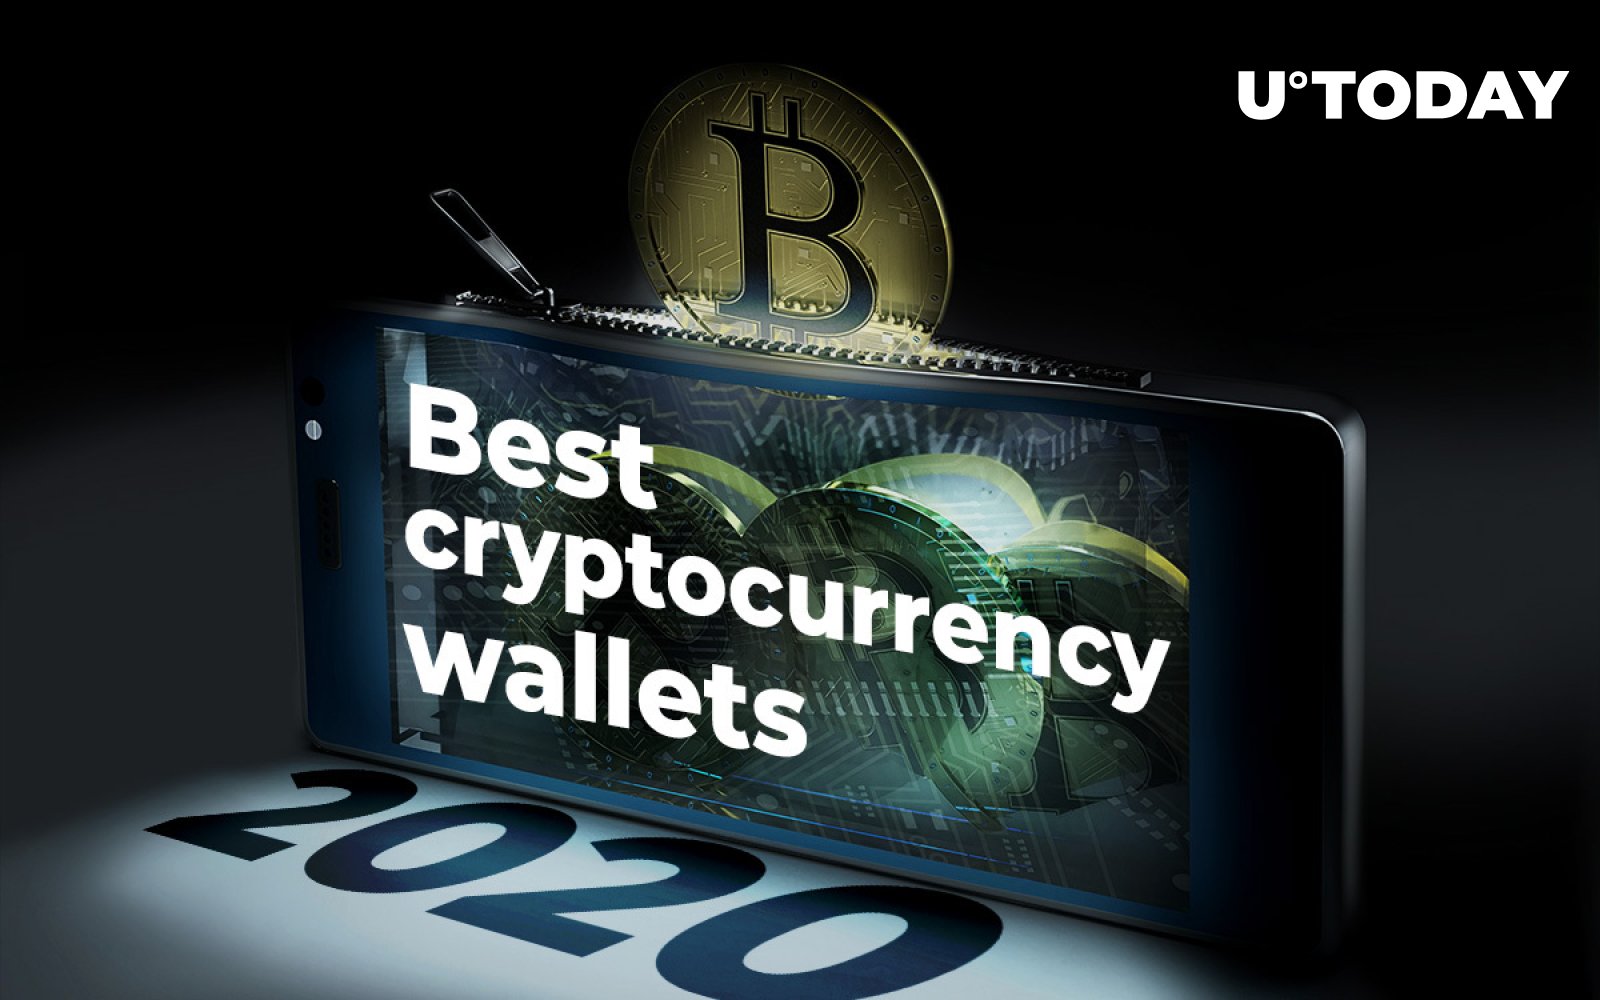 Top 7 Bitcoin Wallets to Use in 